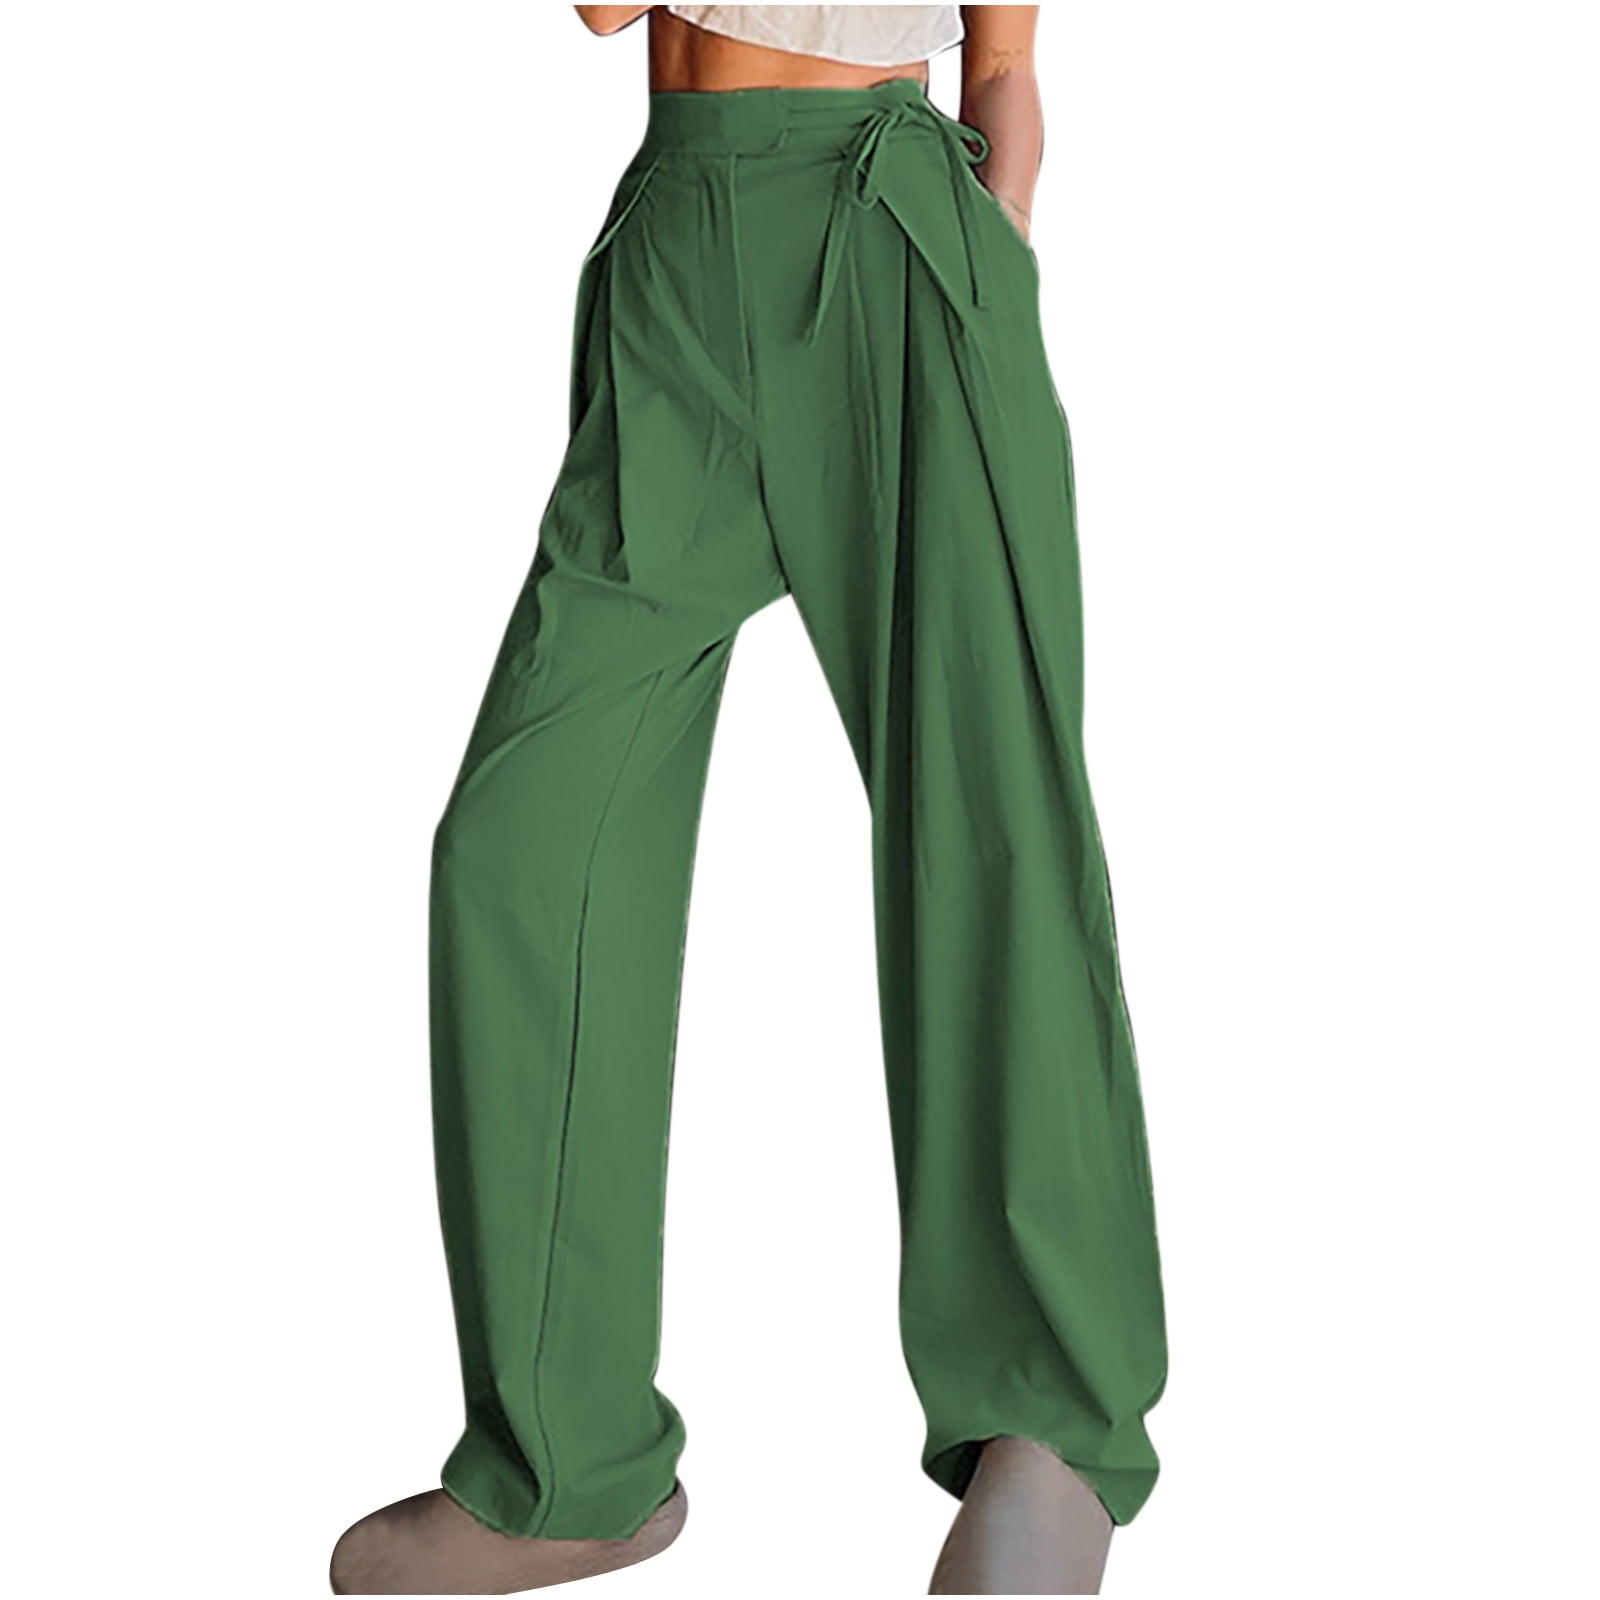 Mrat Yoga Pants with Pockets for Women Full-Length Trousers Wide Leg ...